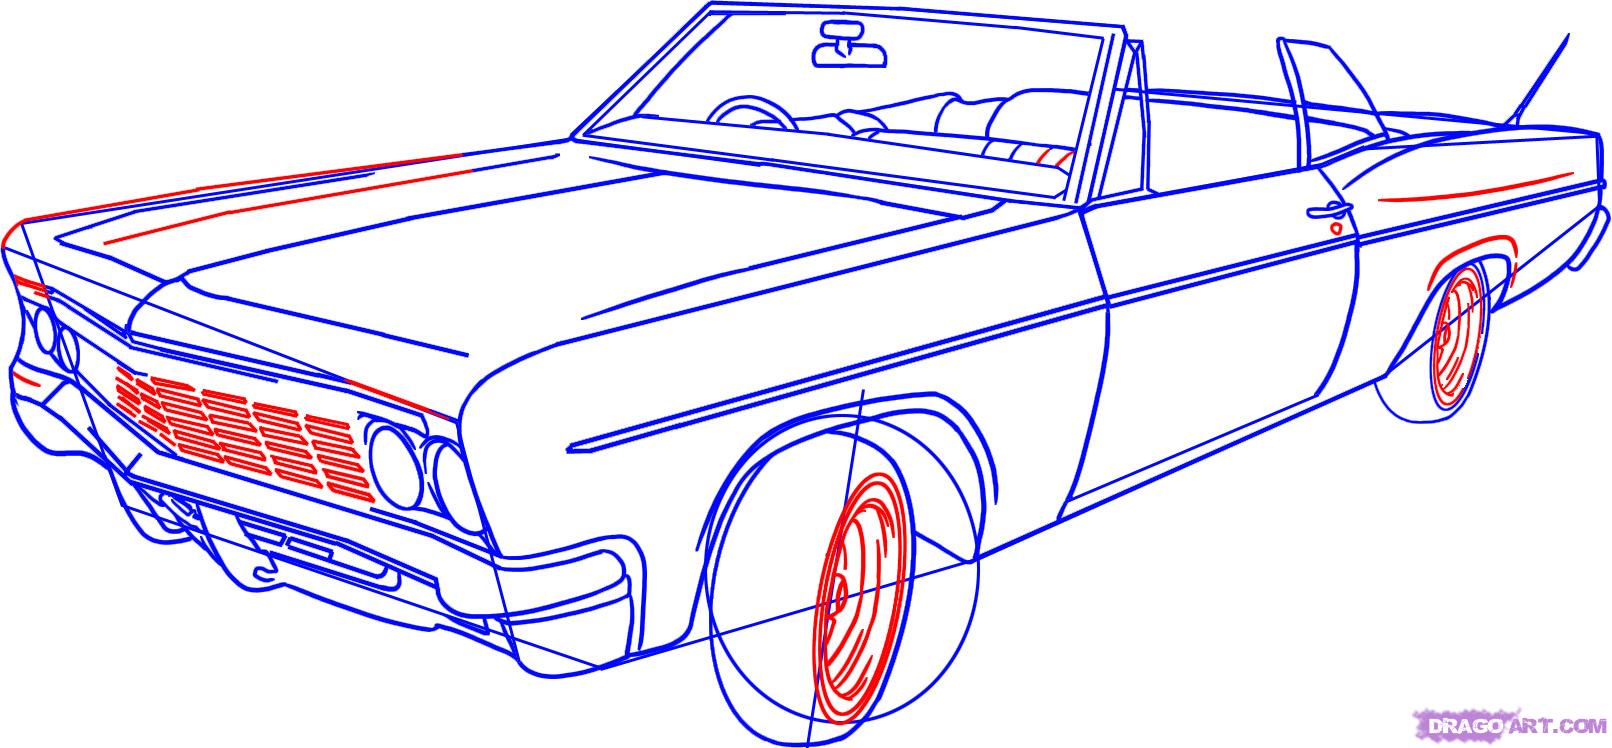 How To Draw A Lowrider, Step - 64 Impala Drawing. 